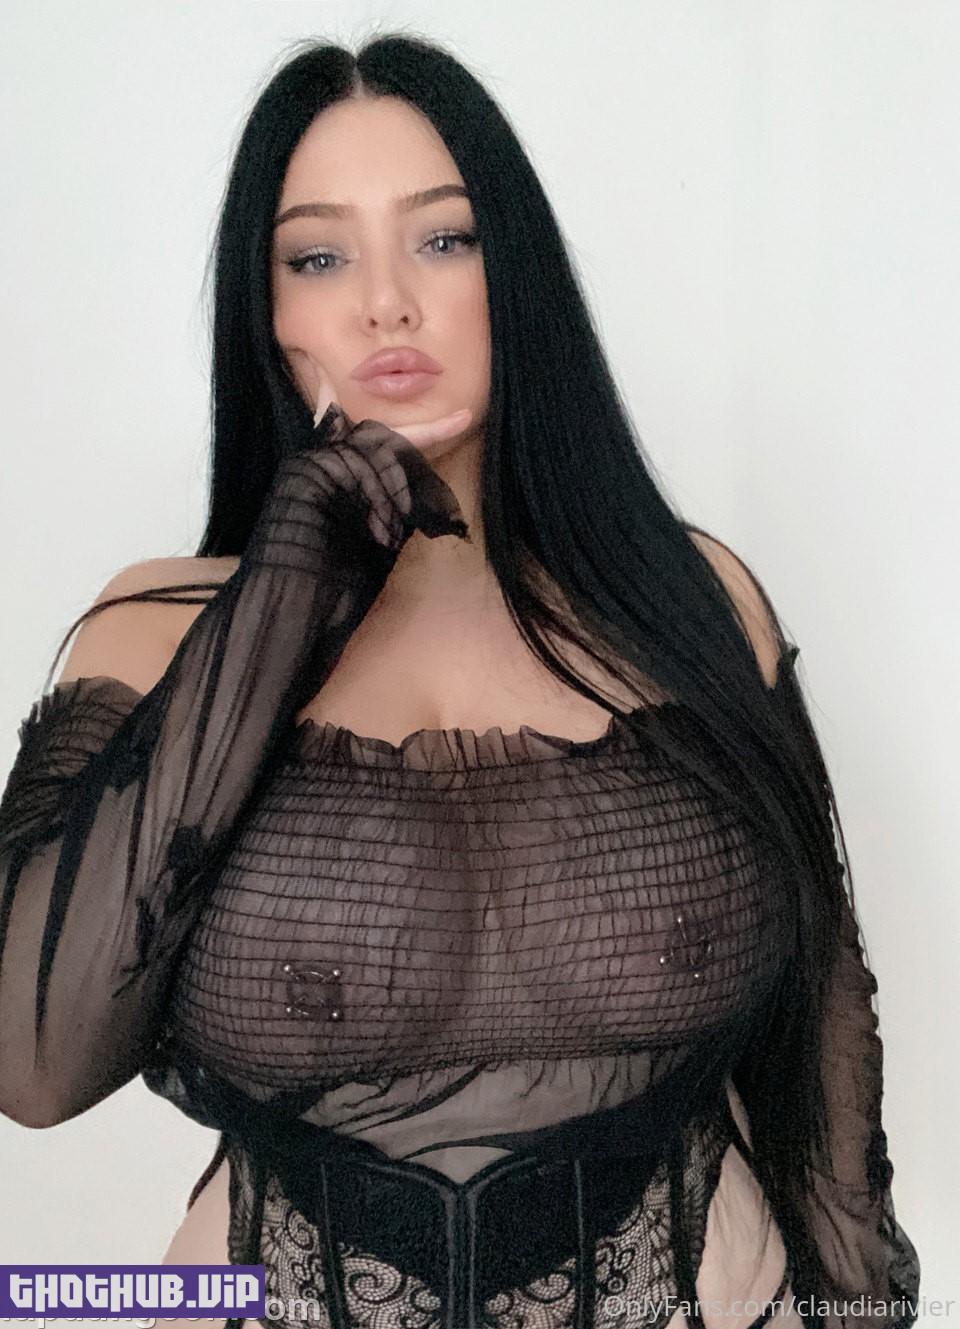 1660895648 868 Claudia Rivier %E2%80%93 Thick Natural Hoe Onlyfans Nudes